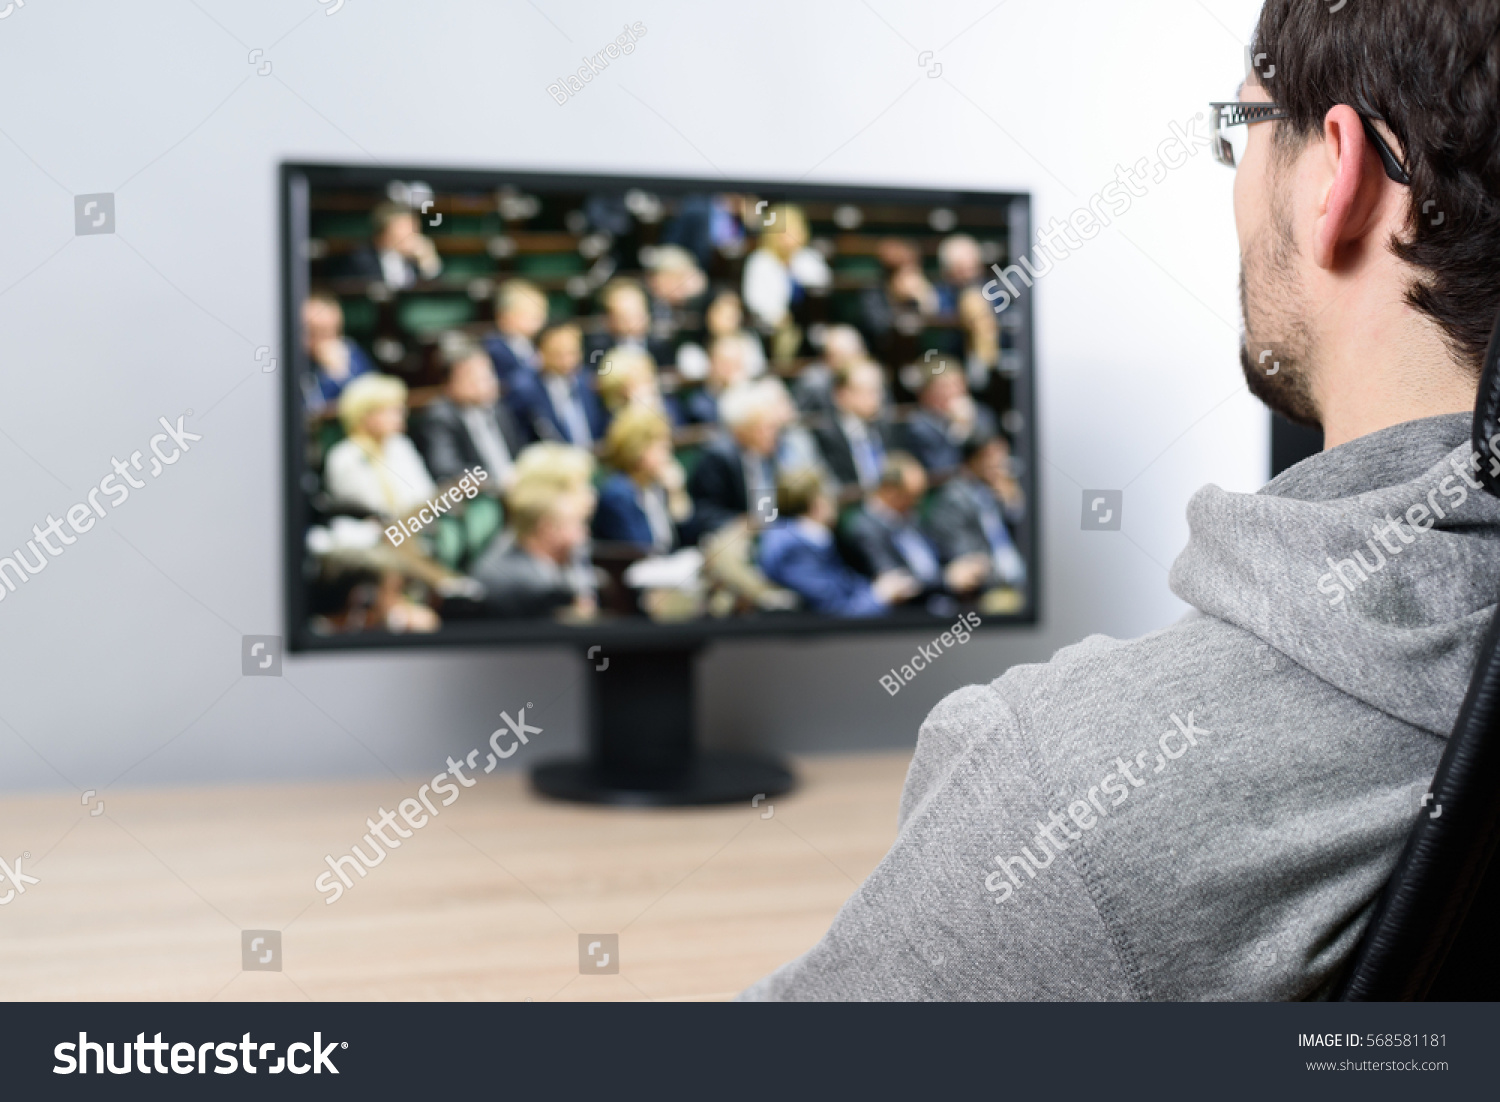 relaxed man watching (on TV) parliament during vote on laws #568581181